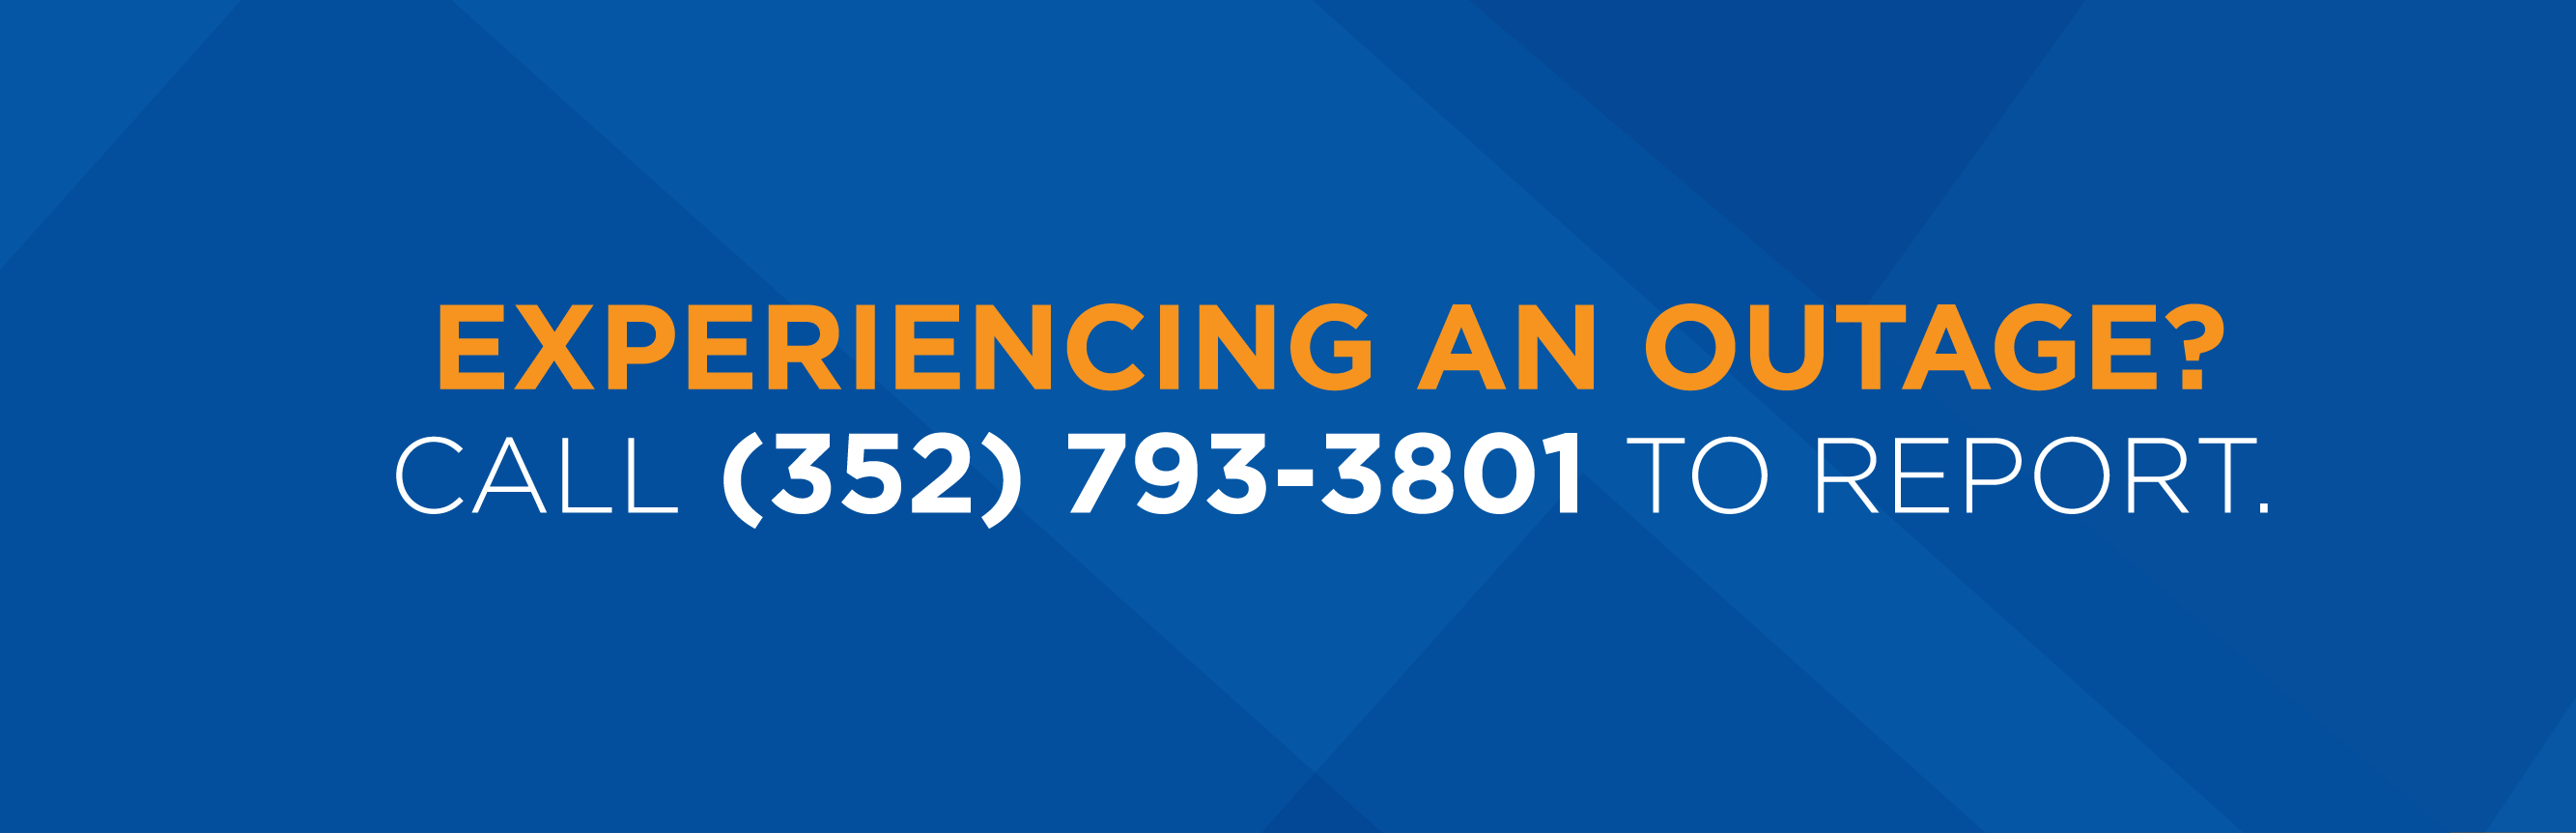 Experiencing an outage? Call (352) 793-3801 to report.